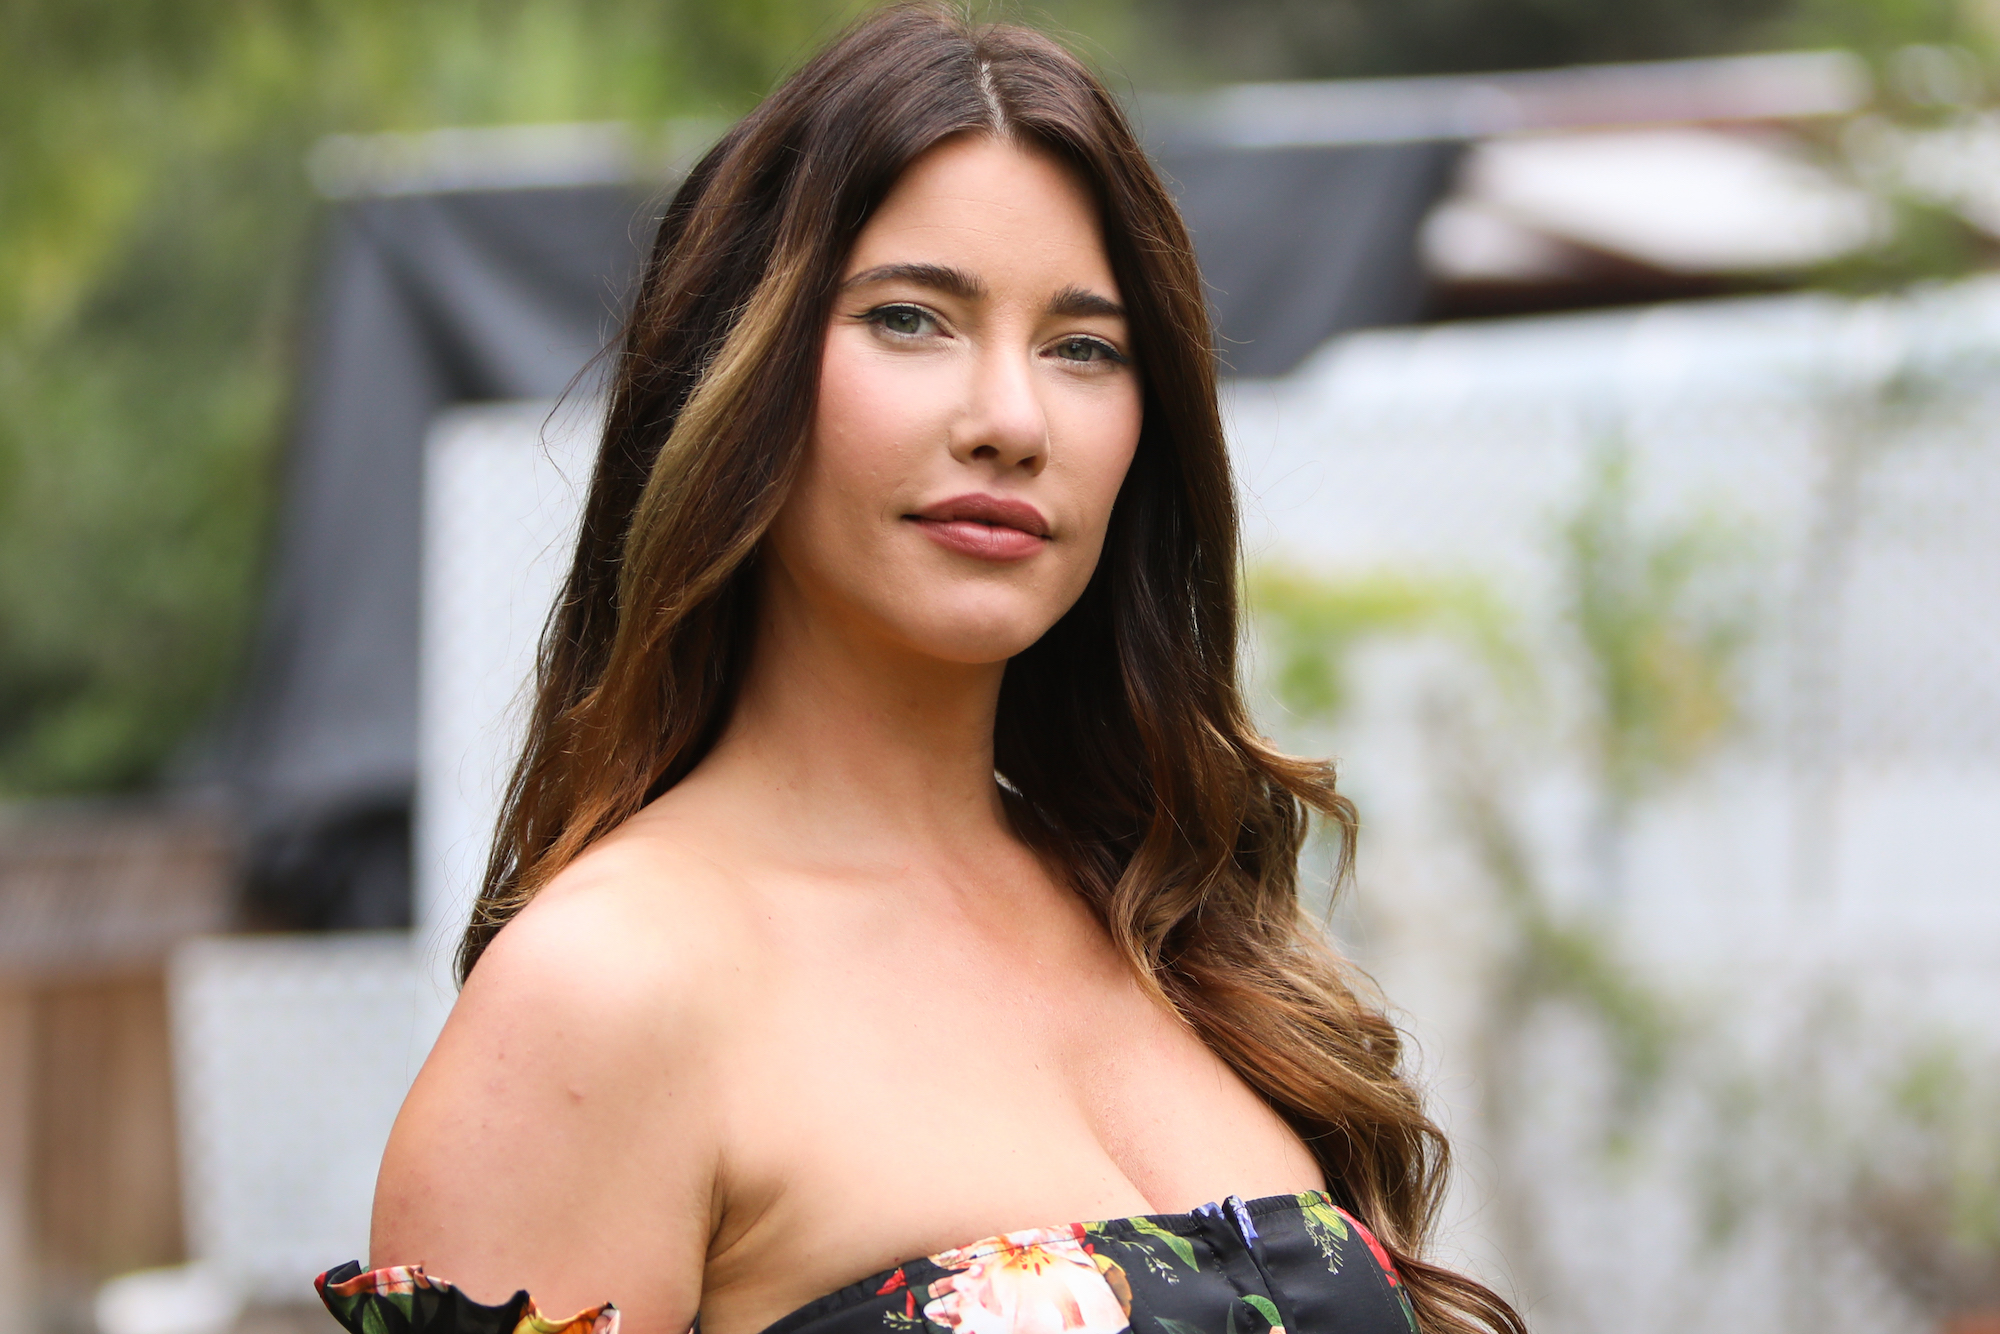 Jacqueline MacInnes Wood smiling in front of a blurred background